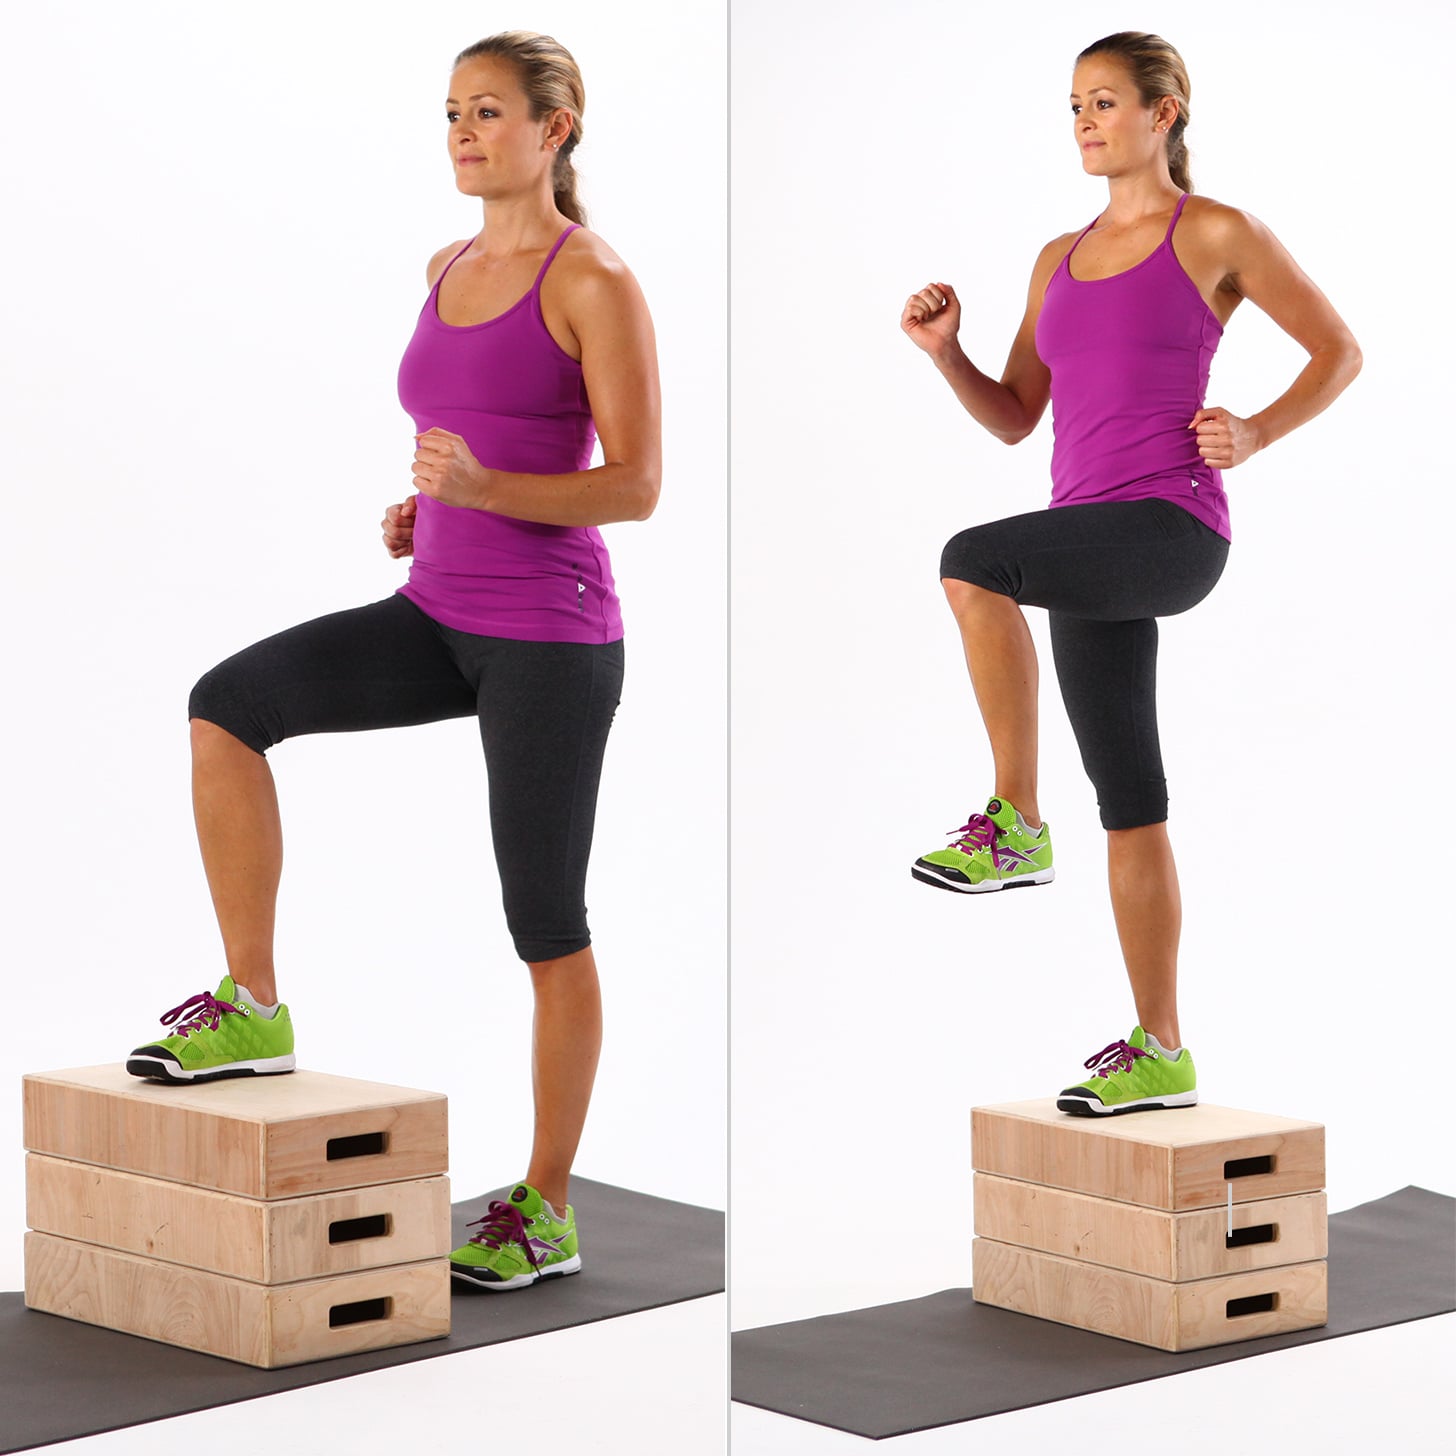 Step to the side and feel the burn: How side steps exercise can tone your  glutes, hips, and thighs